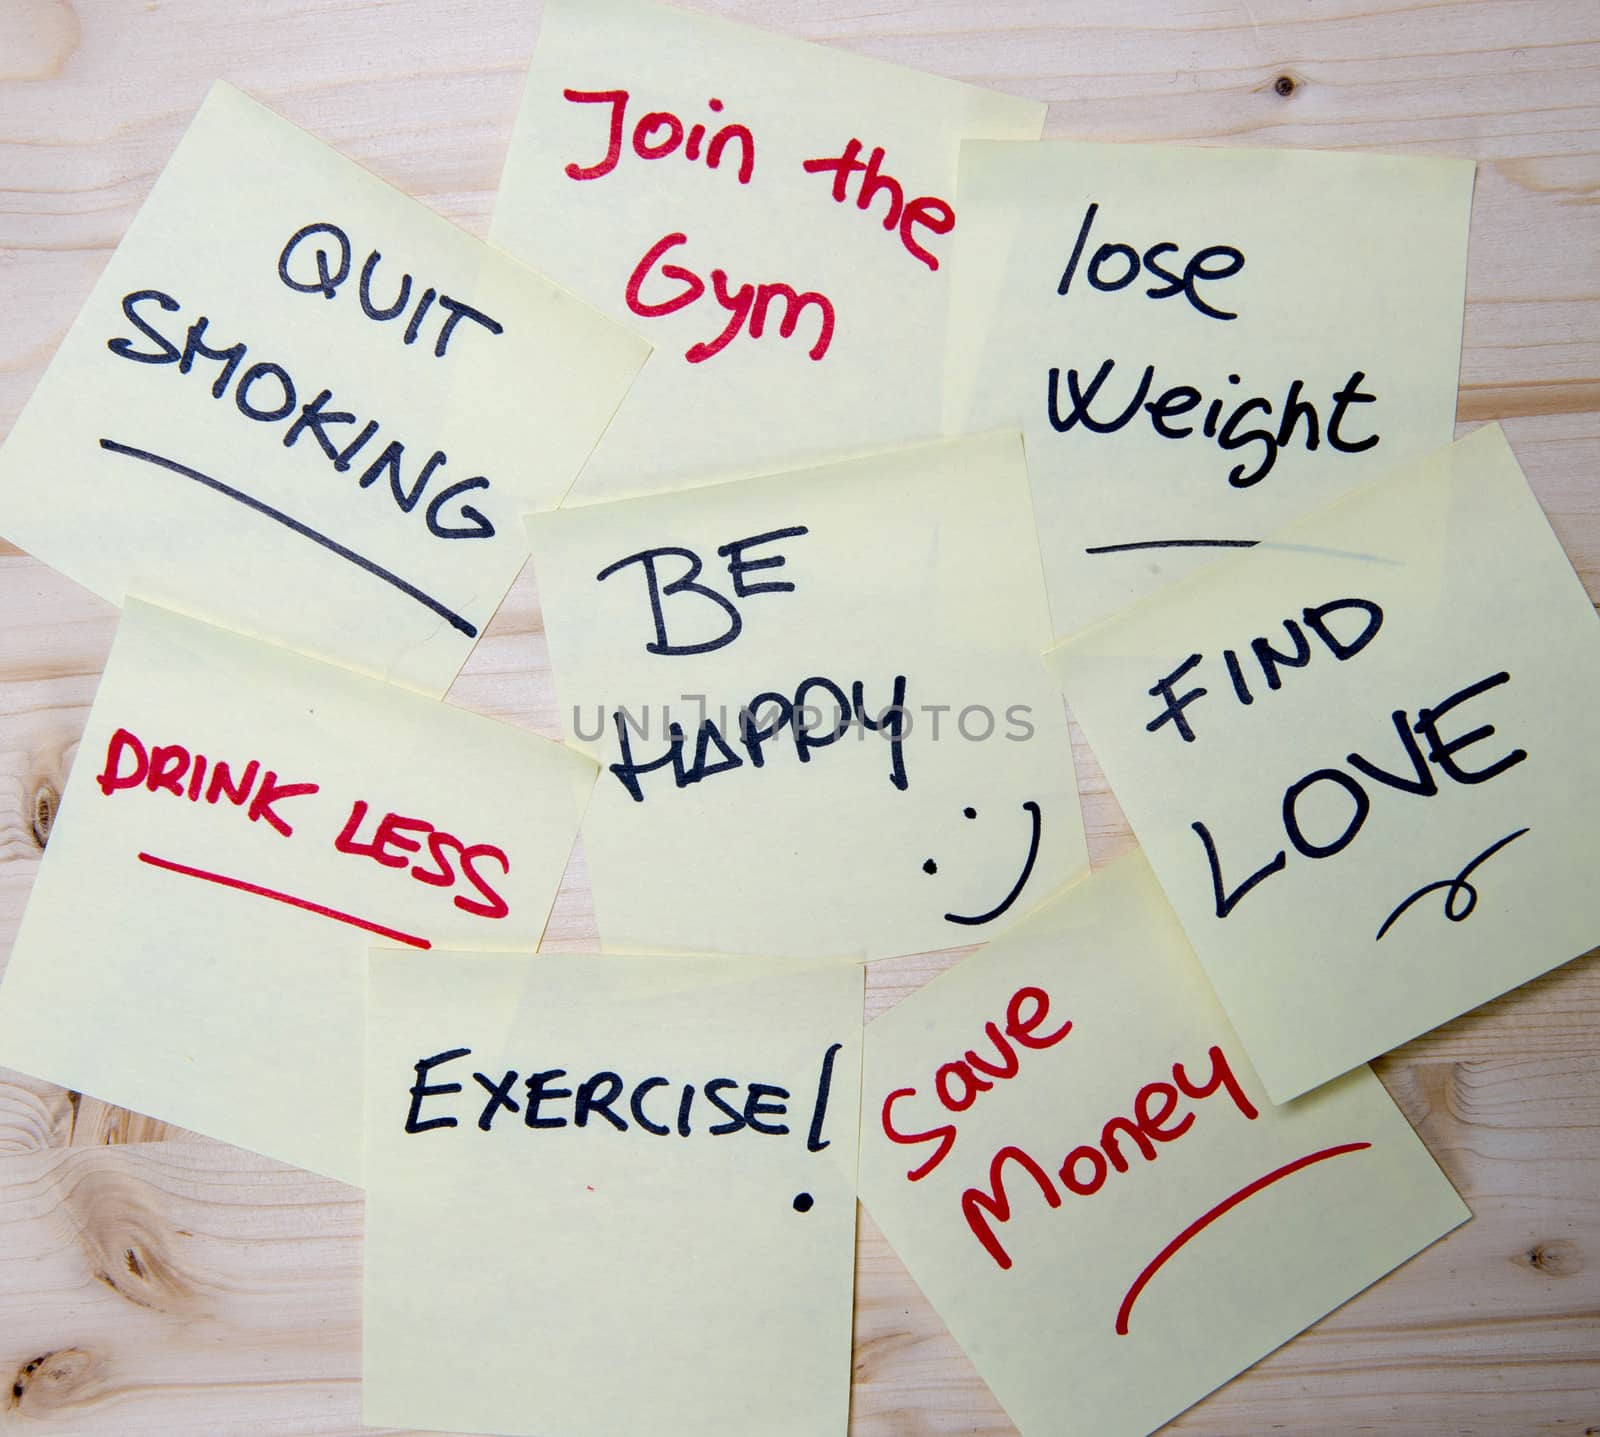 New year Resolutions Note by ocusfocus